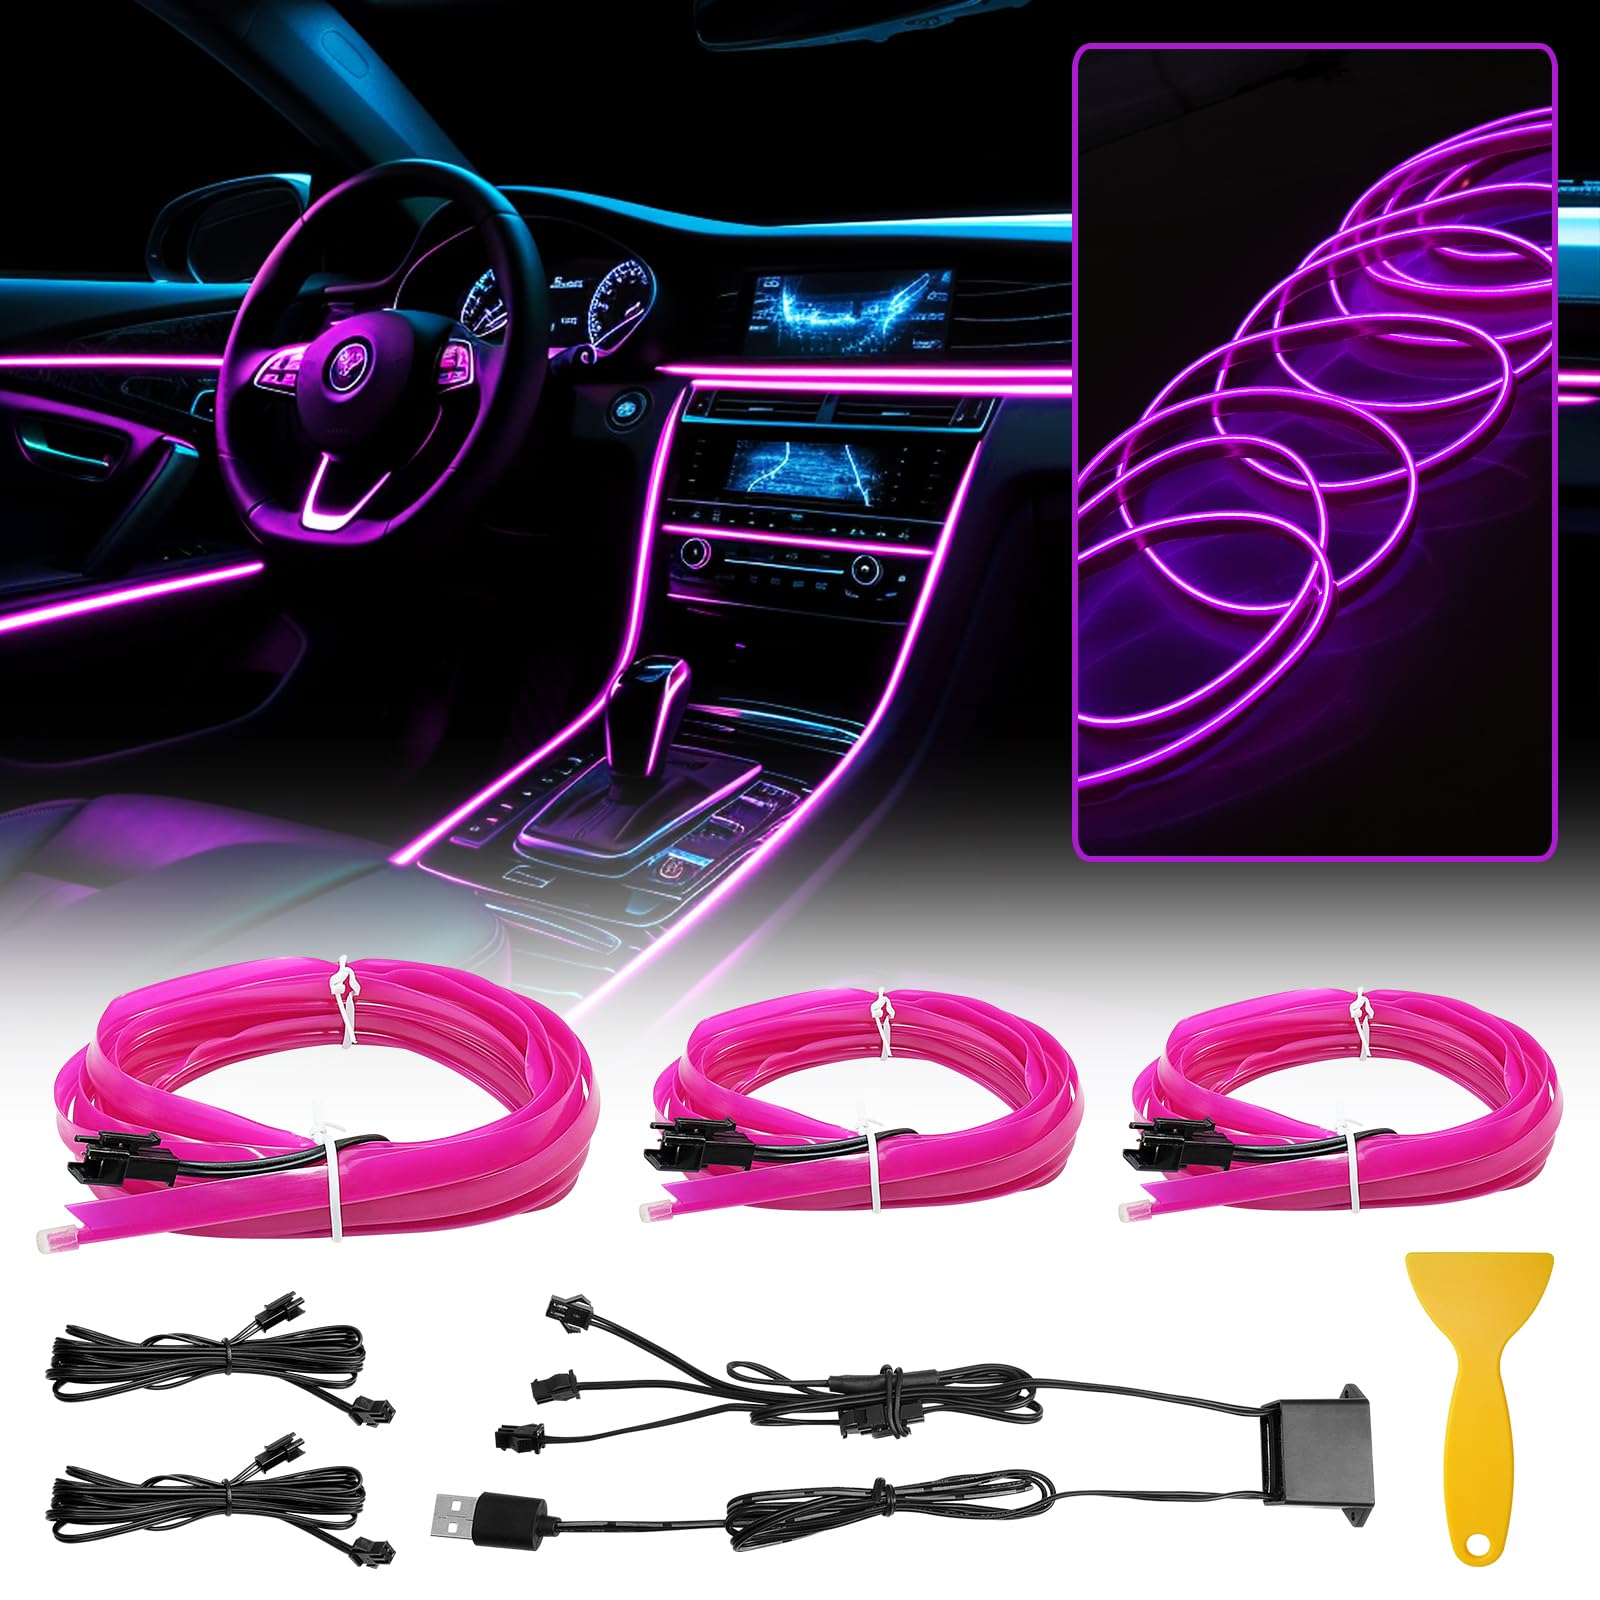 WOWLED Purple El Wire Car interior Lights, 3 in 1 USB Neon Wire Light Kit for Car Ambient Lighting Atmosphere Car Led Interior Strip Light Sewing Edge Decoration(5m / 5V) von WOWLED